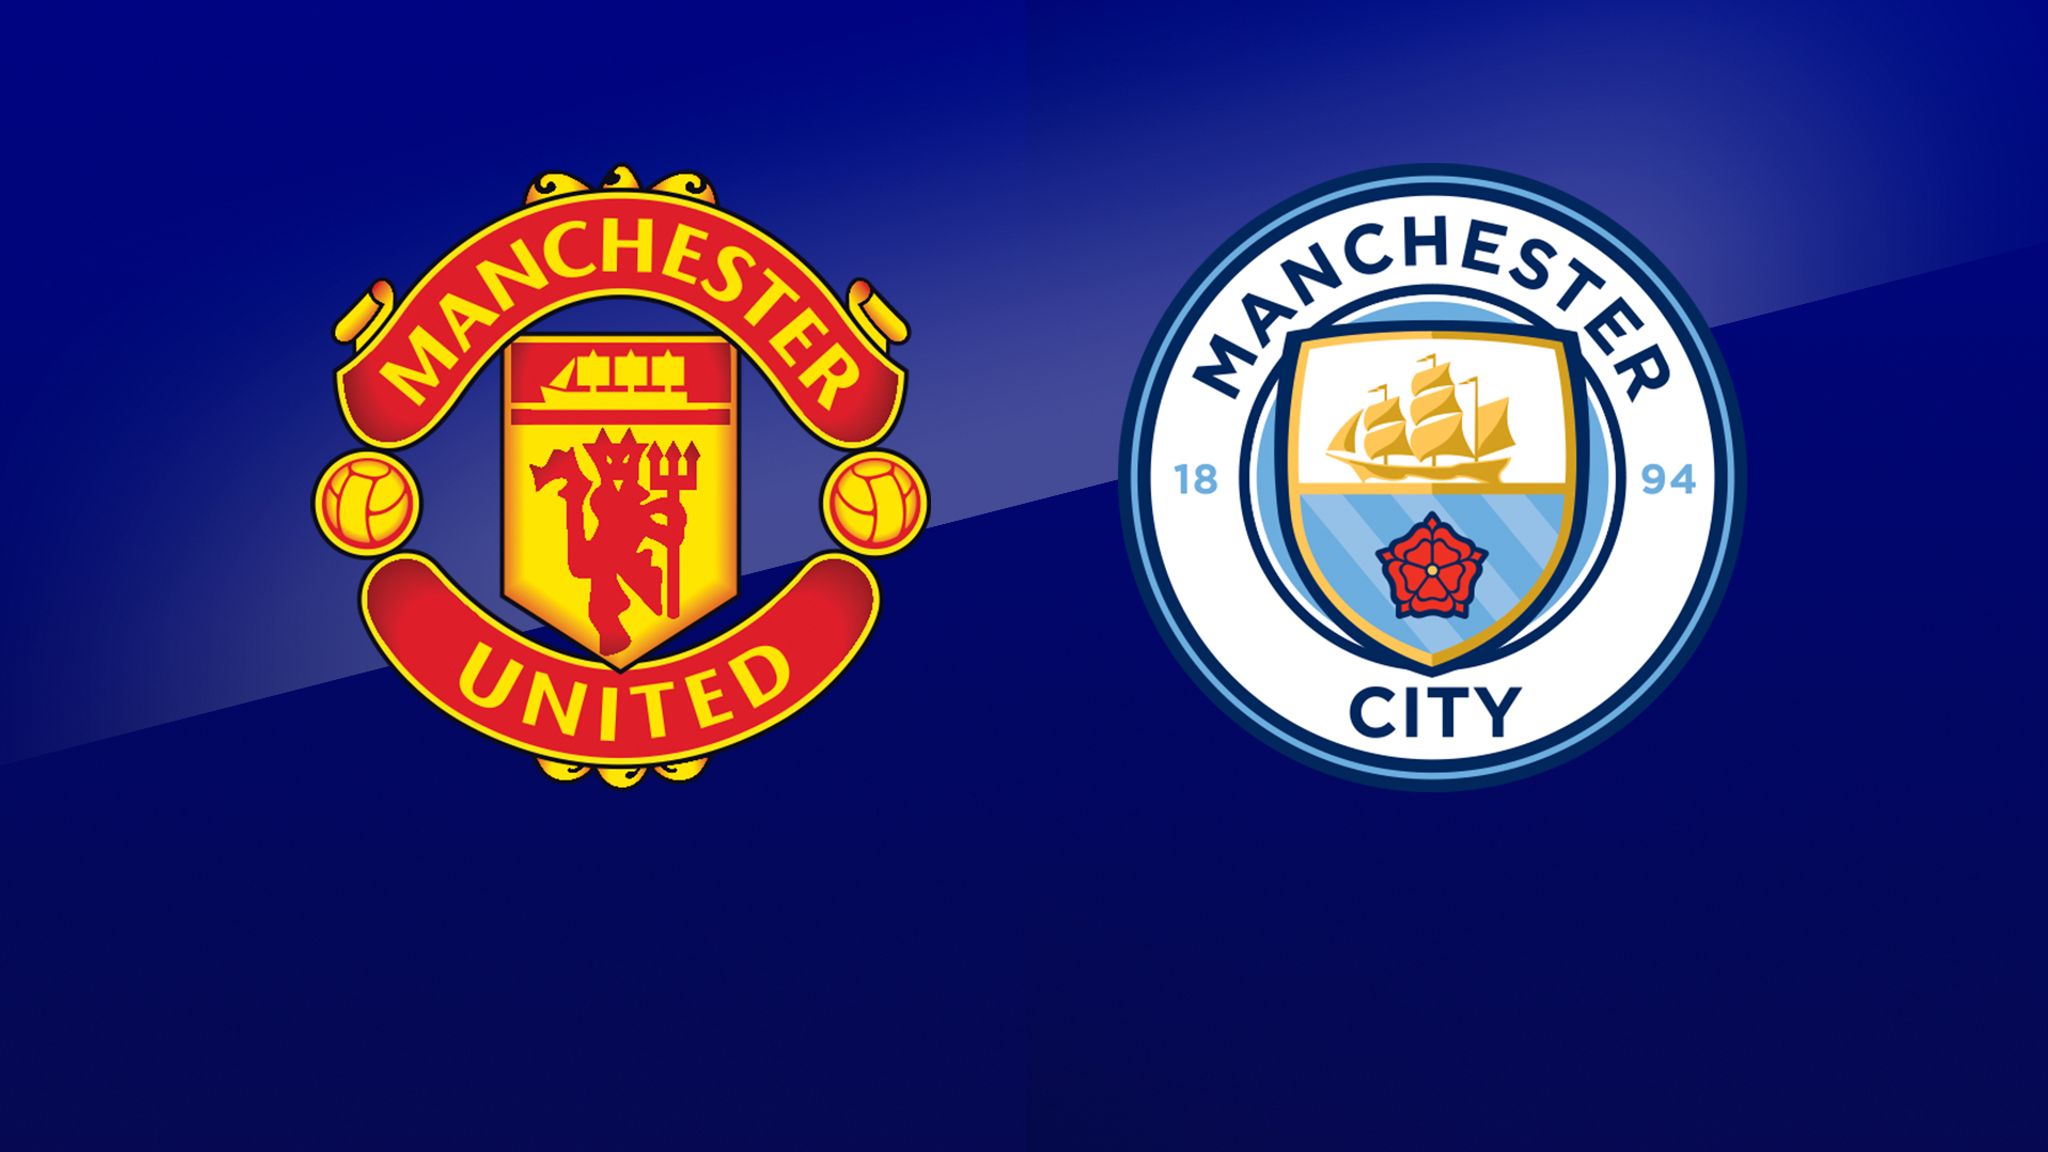 Manchester United vs Man City Manchester derby kick-off time, how to watch live or stream with Sky Sports Football News Sky Sports